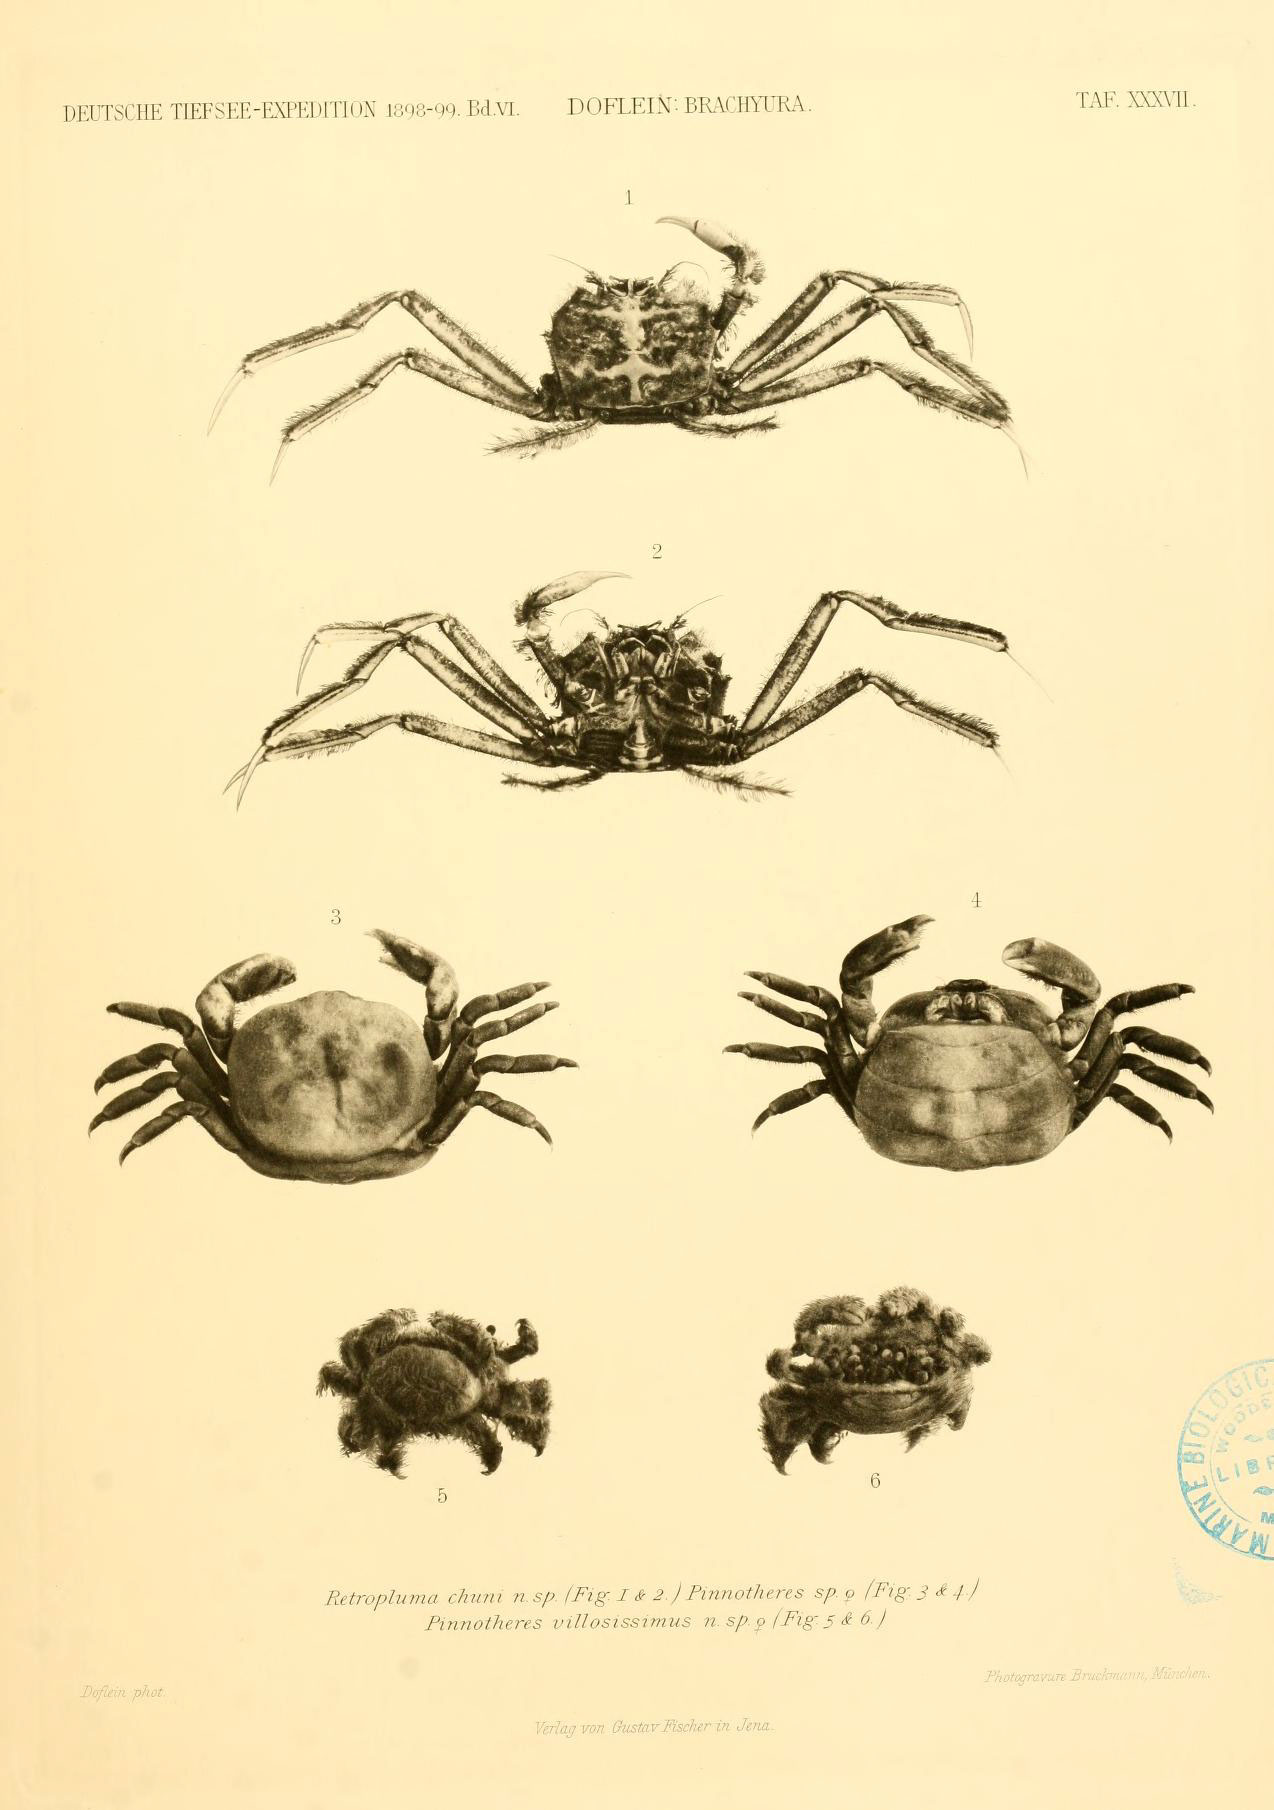 a print of four crabs and two crablings